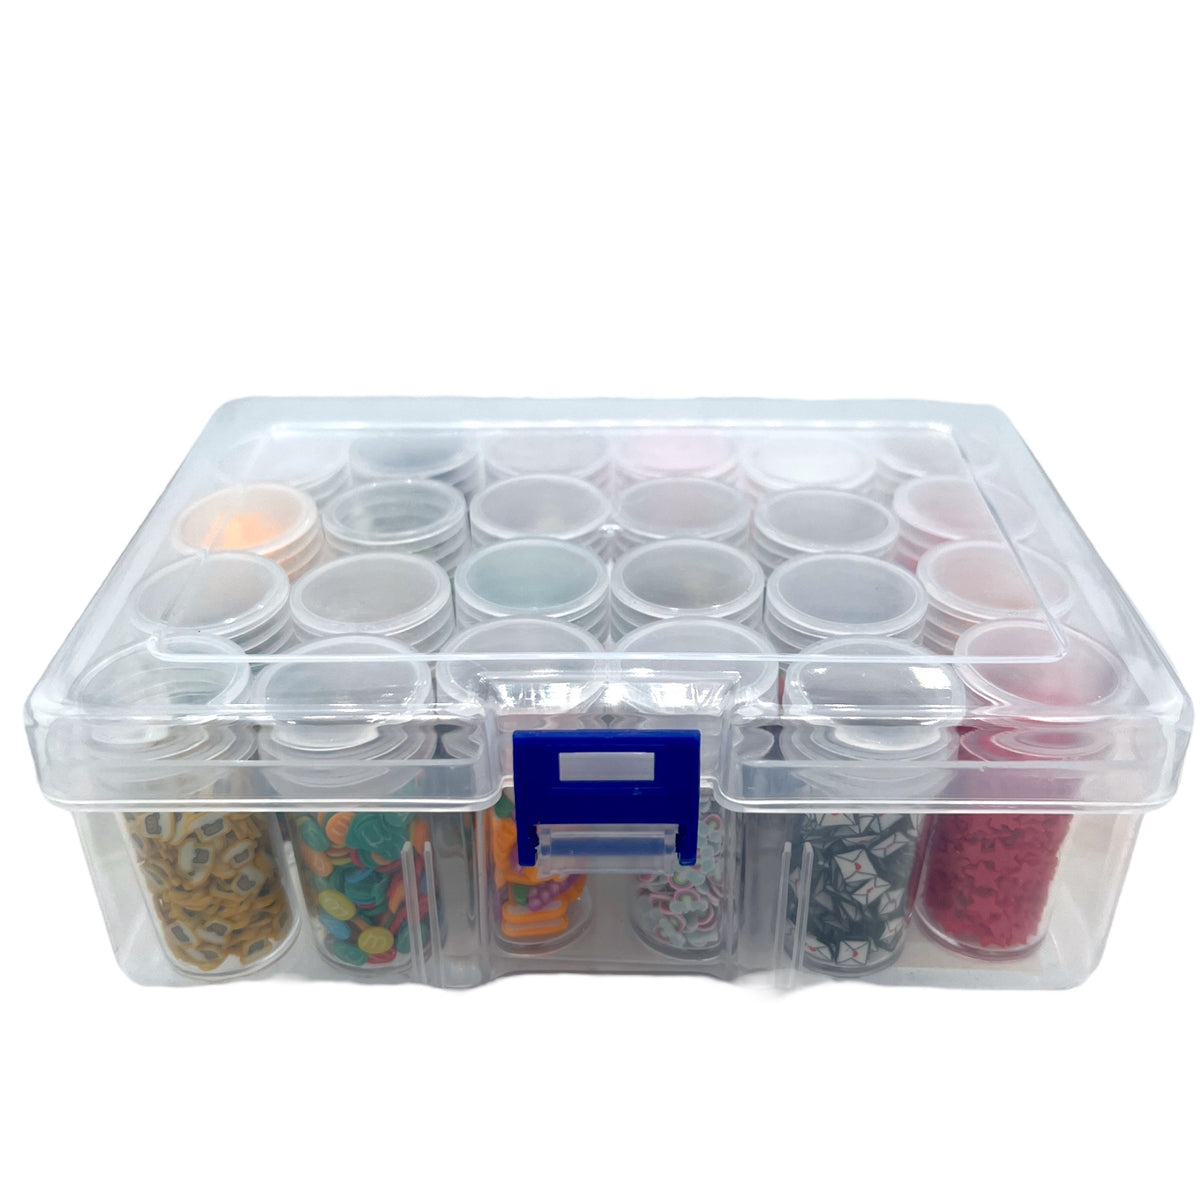 Claynation 24 Clay Kit with FREE Tube Compartment Container